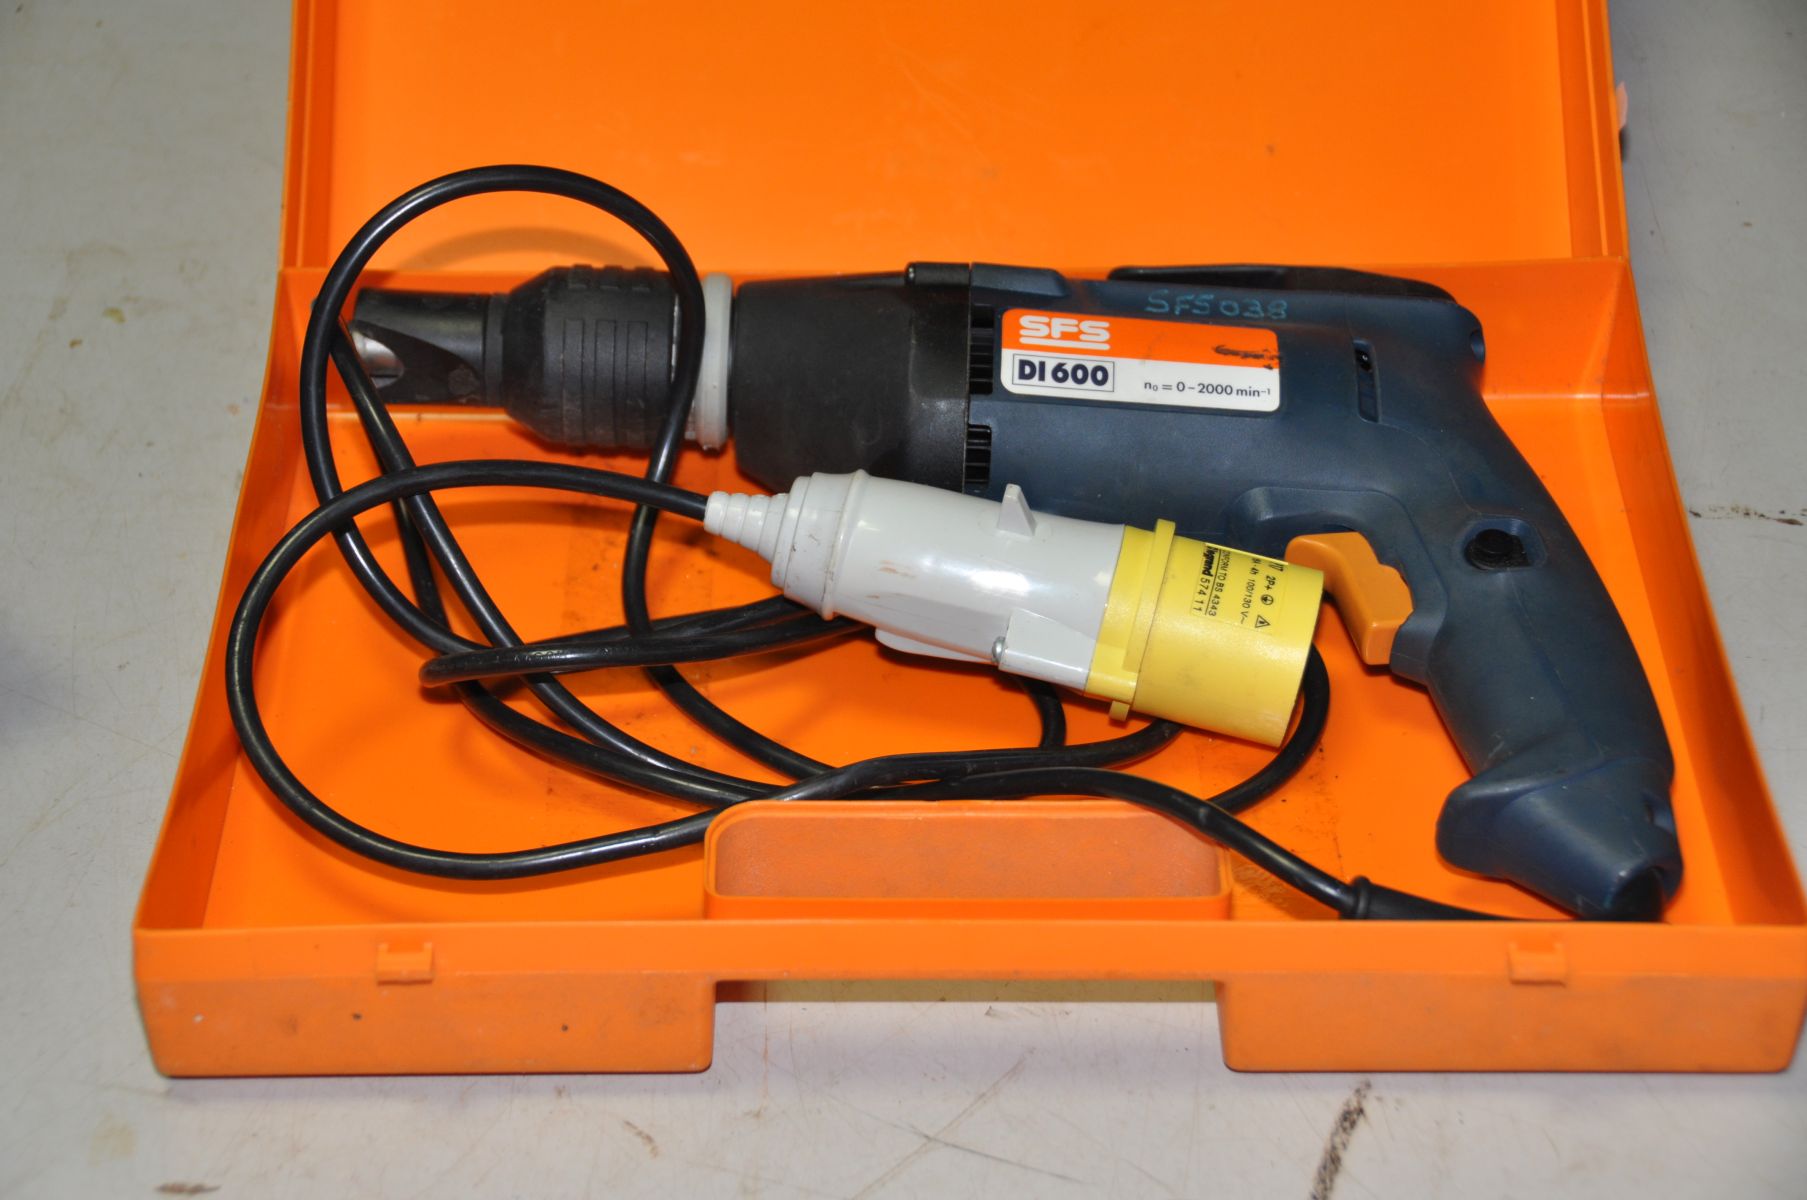 A SFS Di600 110V SCREW GUN in box (no PAT but working) and a Black and Decker BD855 Circular Saw - Image 3 of 3